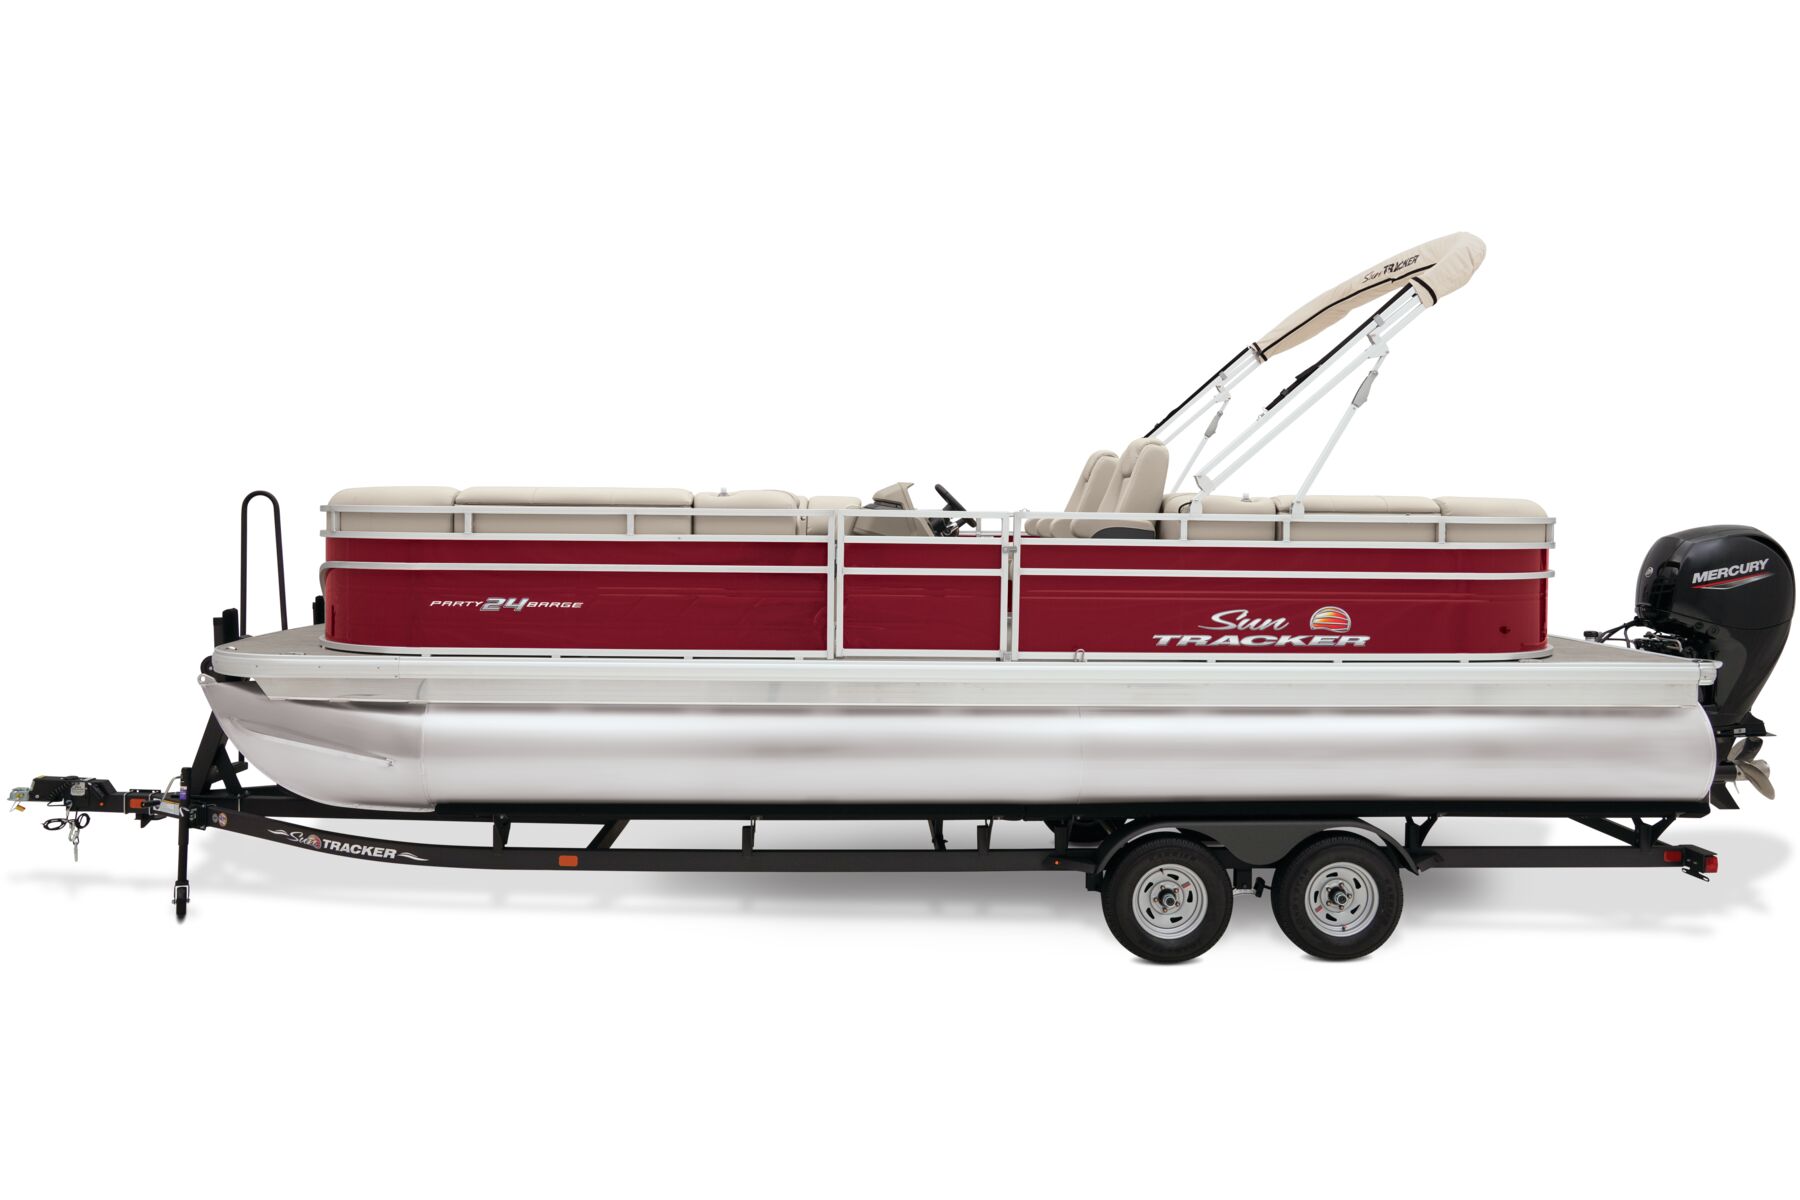 PARTY BARGE 24 DLX - SUN TRACKER Recreational Pontoon Boat